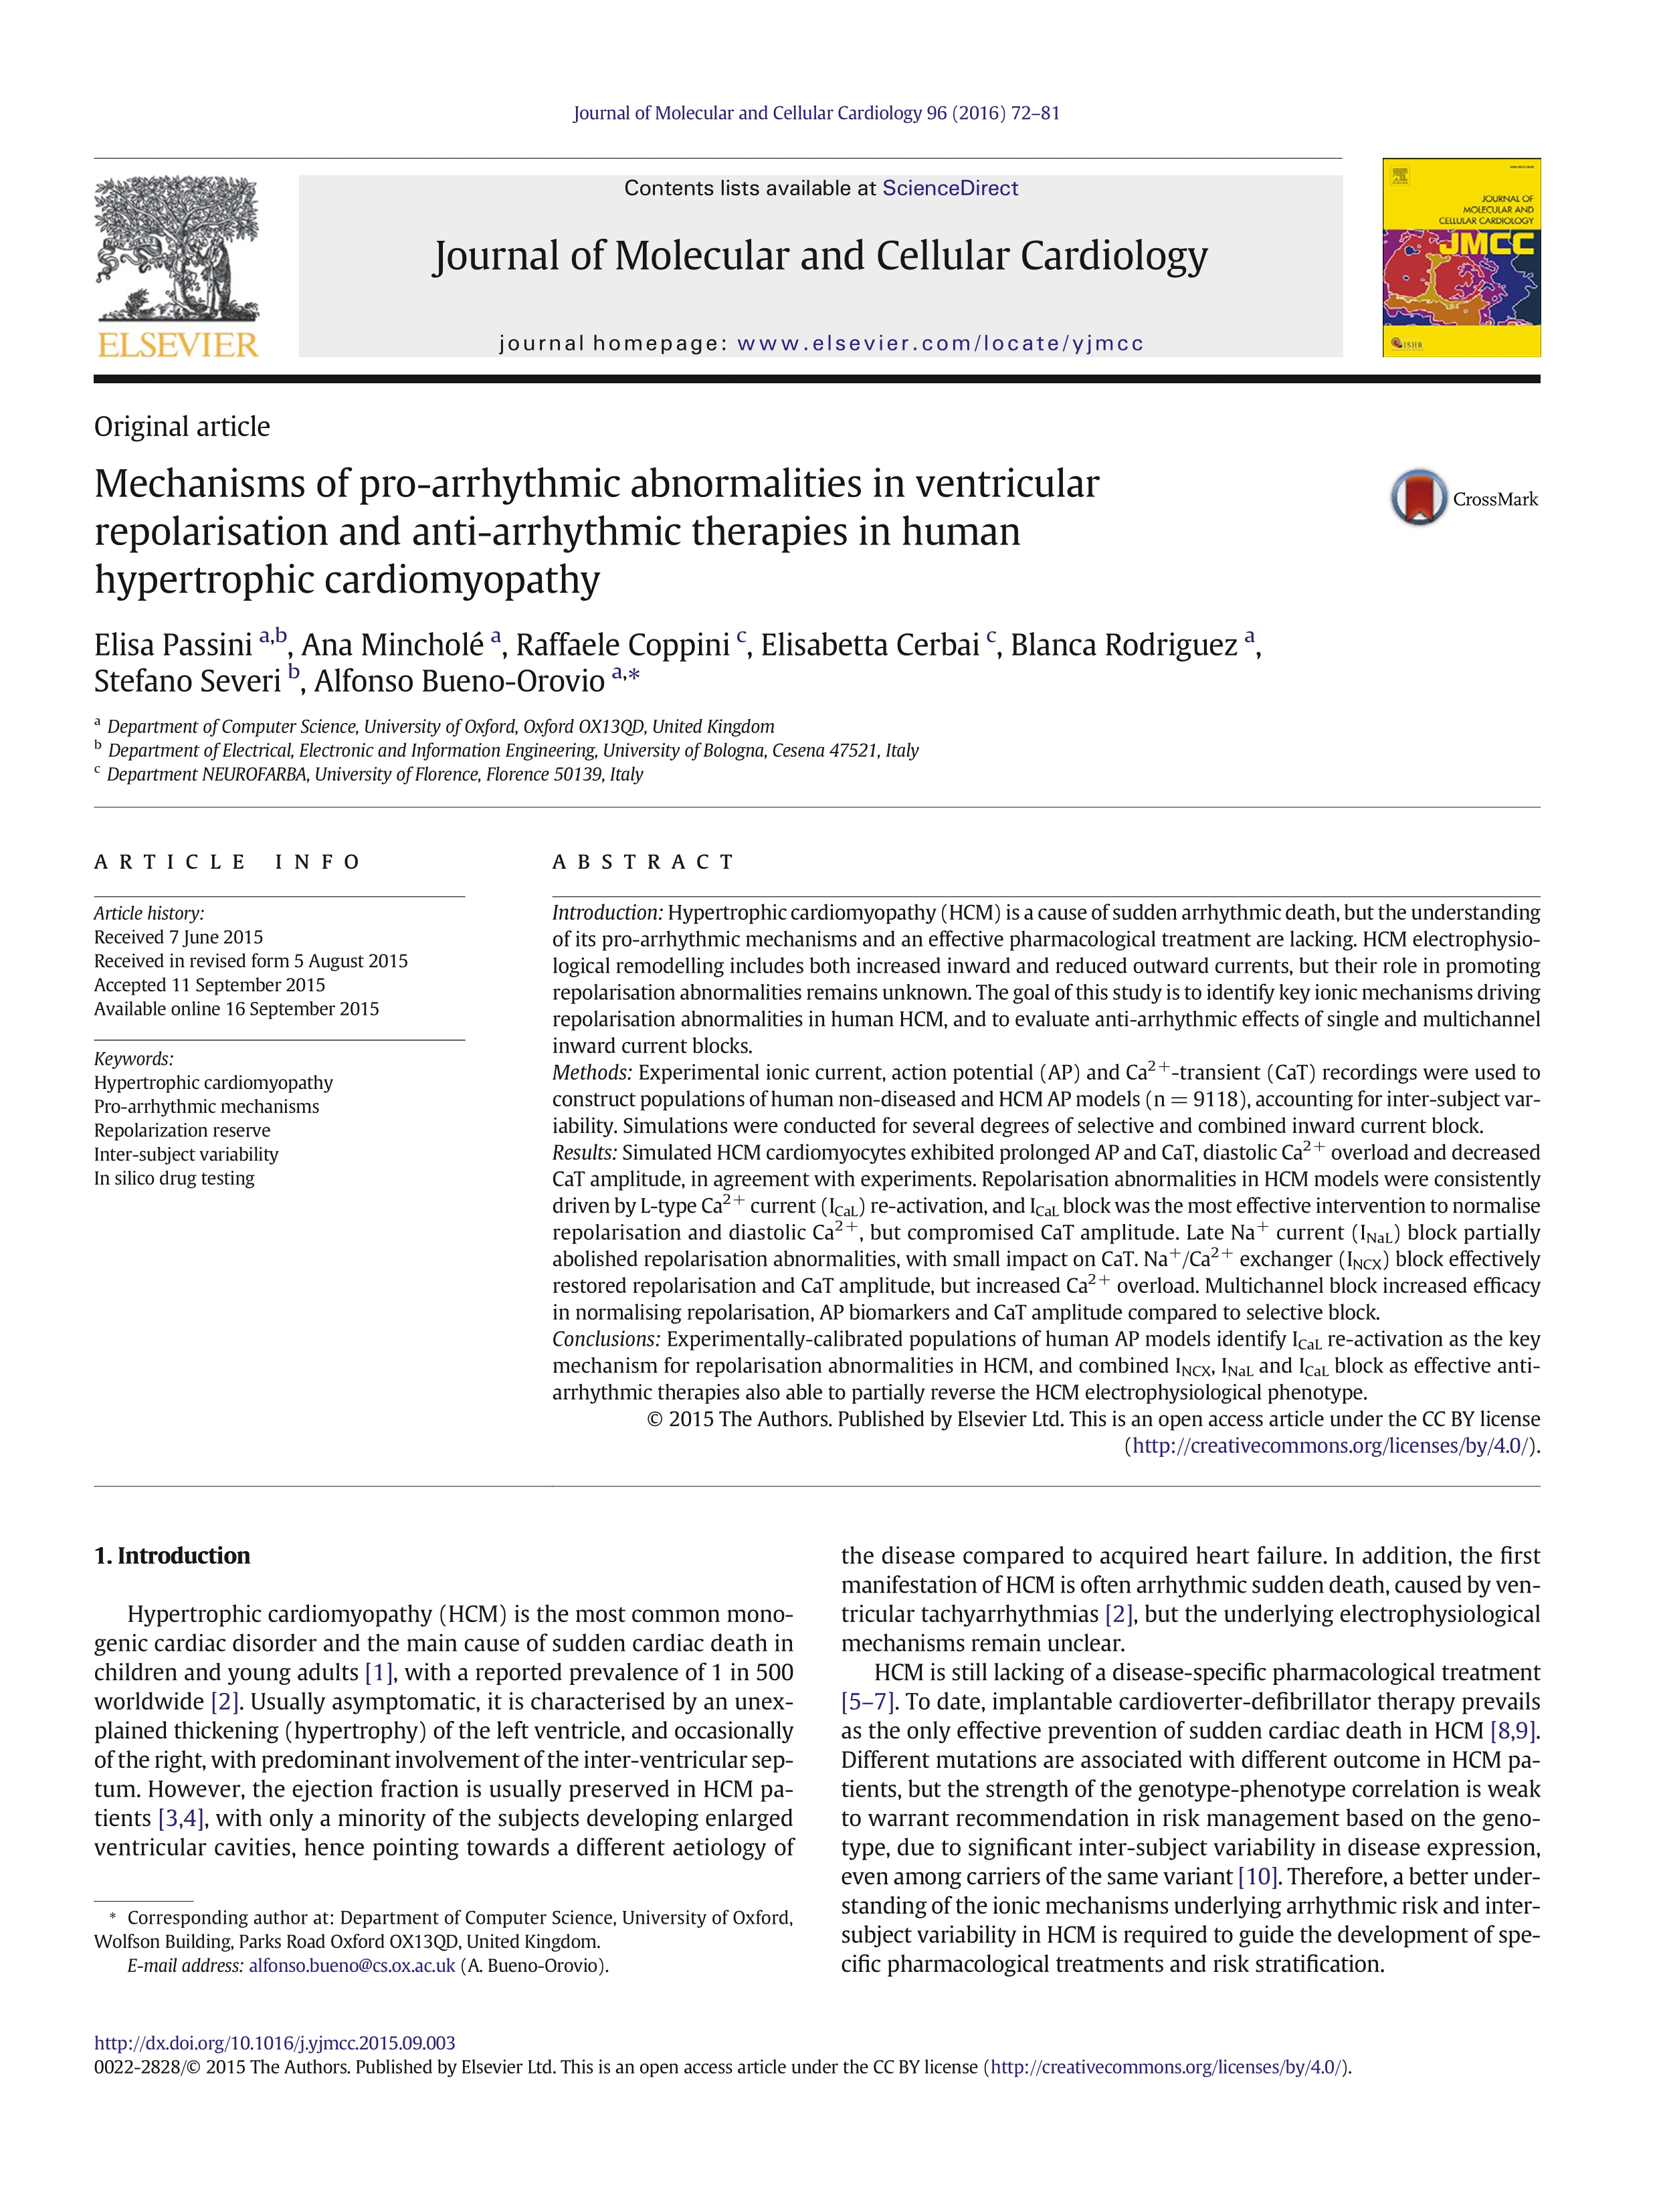 Mechanisms of pro-arrhythmic abnormalities in ventricular repolarisation and anti-arrhythmic therapies in human hypertrophic cardiomyopathy